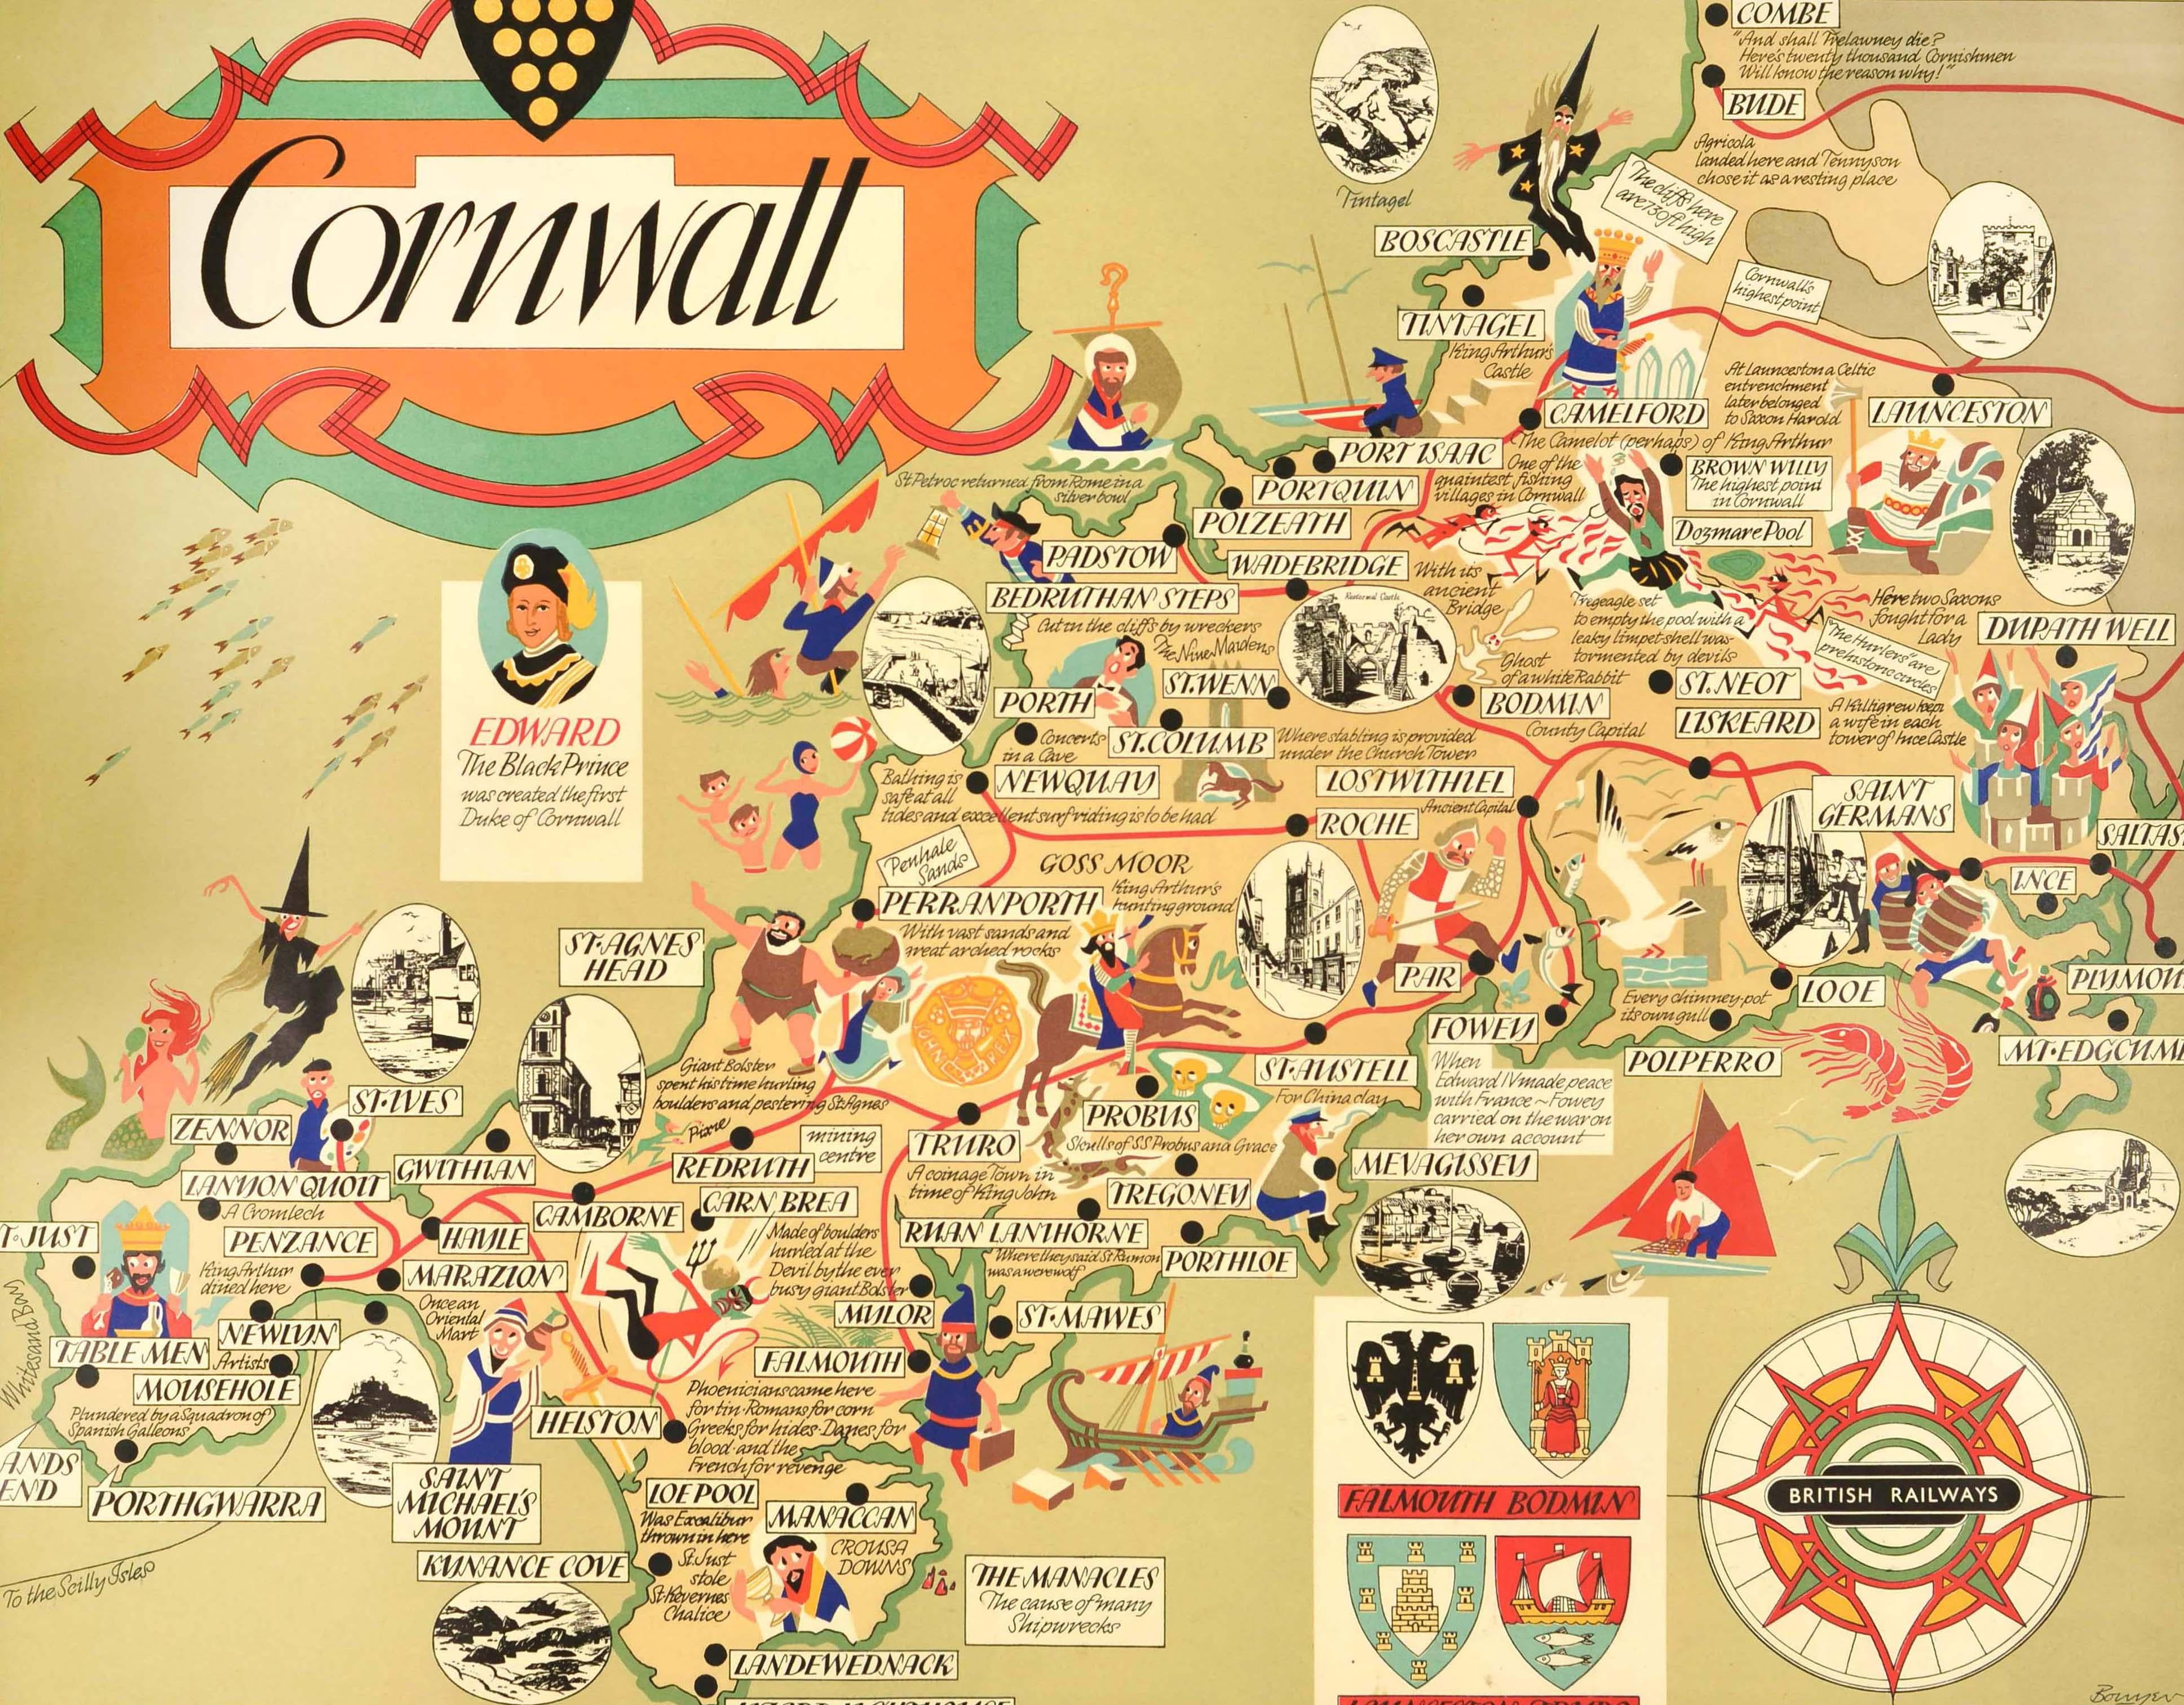 Original vintage British Railways poster for Cornwall in South West England featuring a fun and colourful pictorial map depicting historical myths, legends and events, notable people including the first Duke of Cornwall Edward The Black Prince and